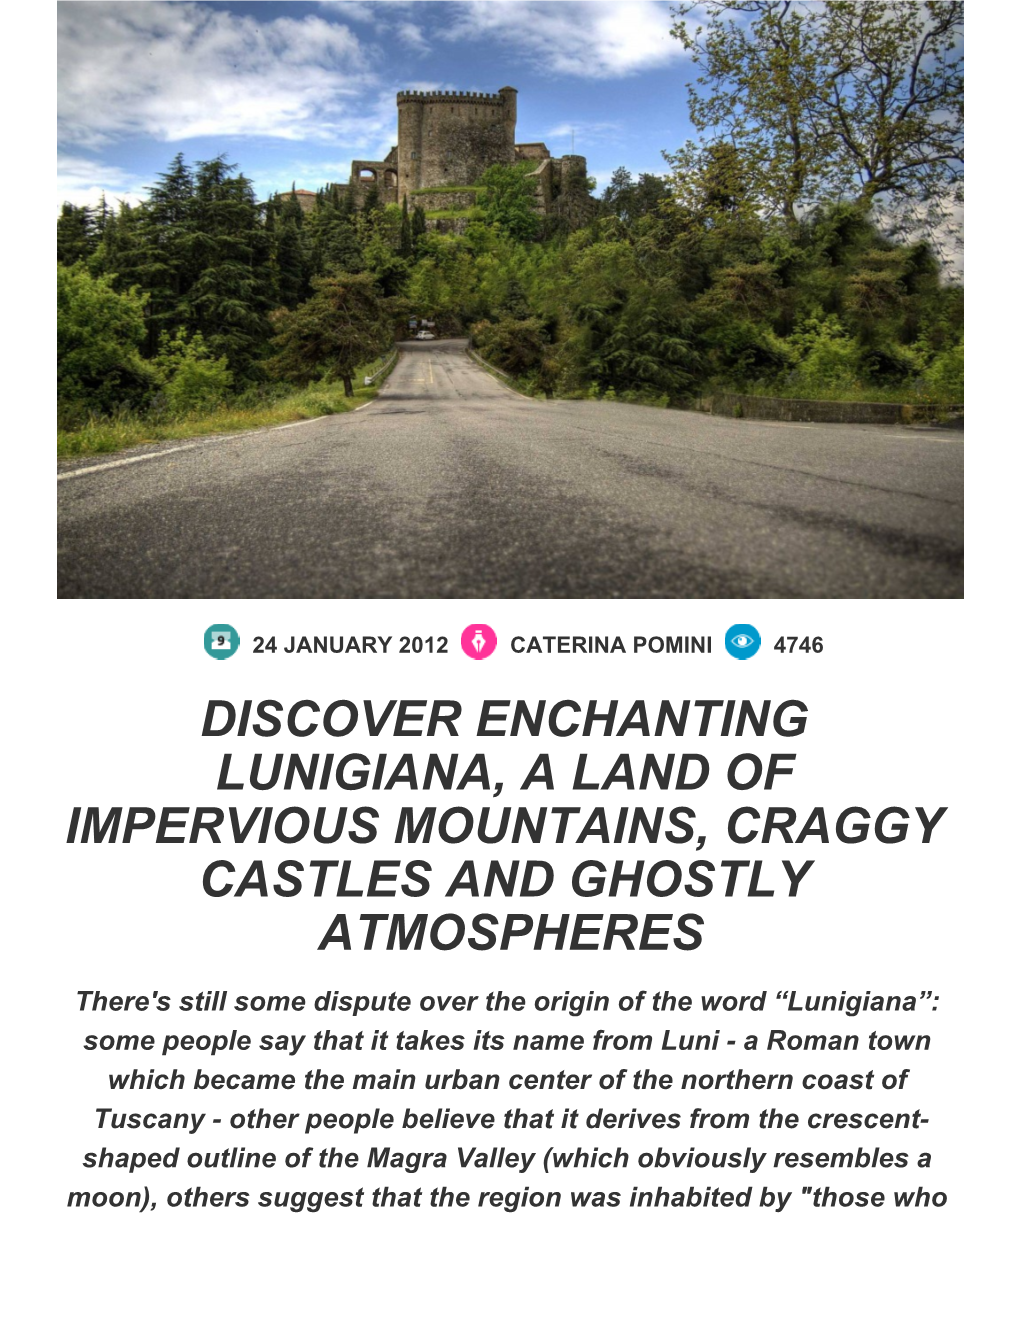 Discover Enchanting Lunigiana, a Land of Impervious Mountains, Craggy Castles and Ghostly Atmospheres